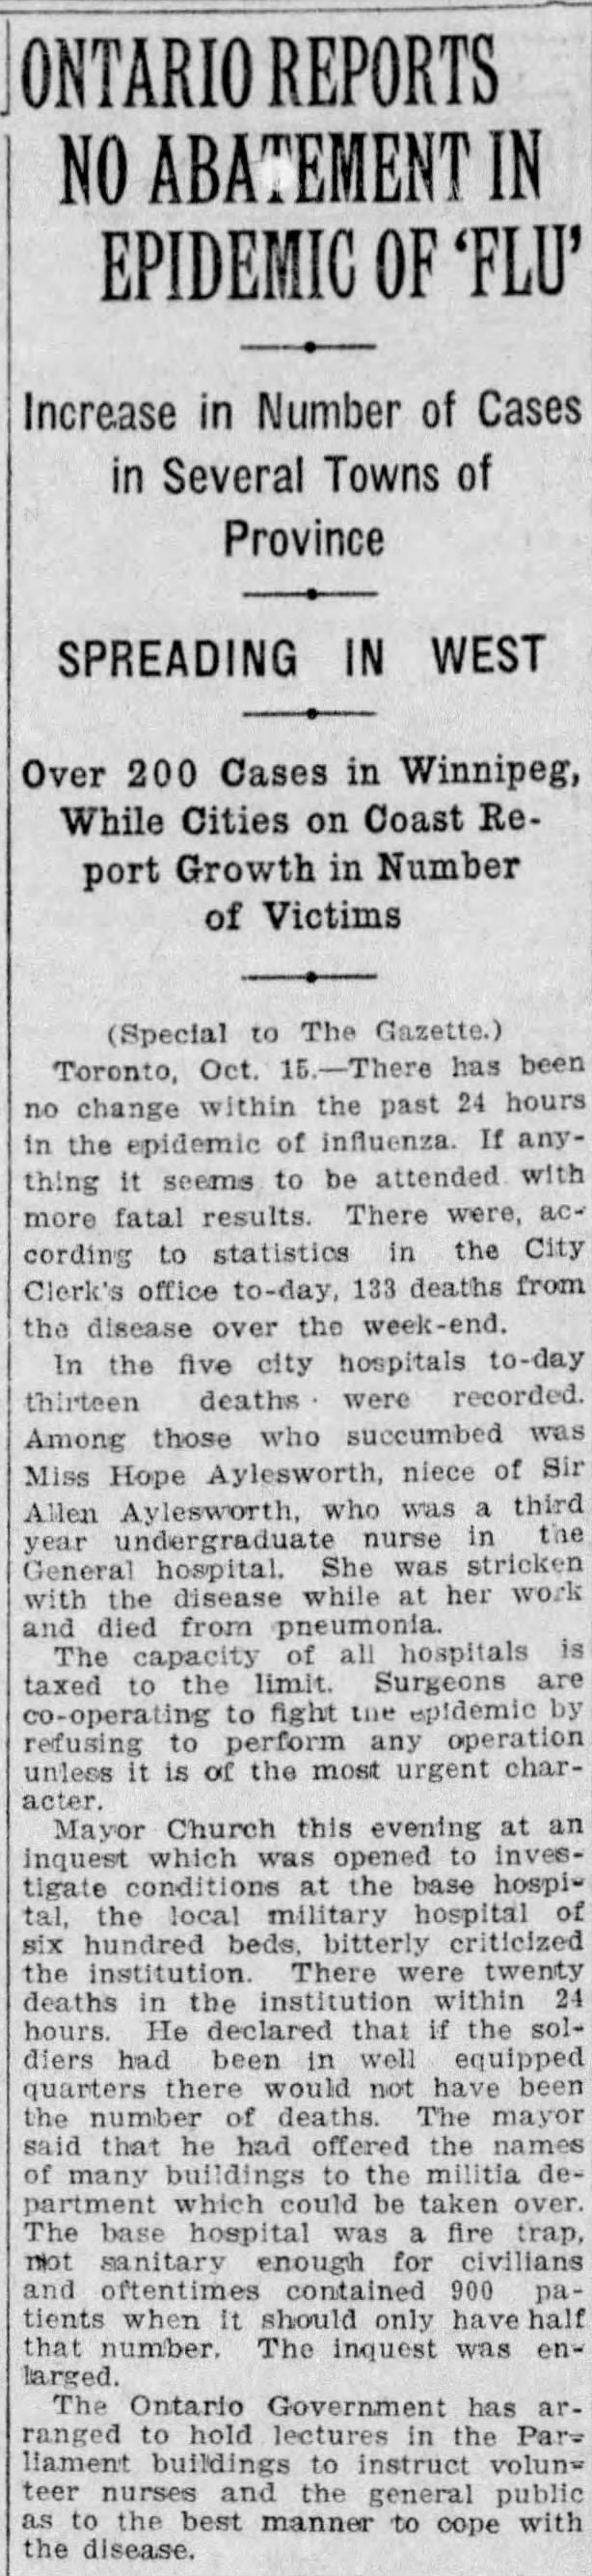 There is "no abatement in epidemic of flu" in Ontario, Canada, as of October 1918